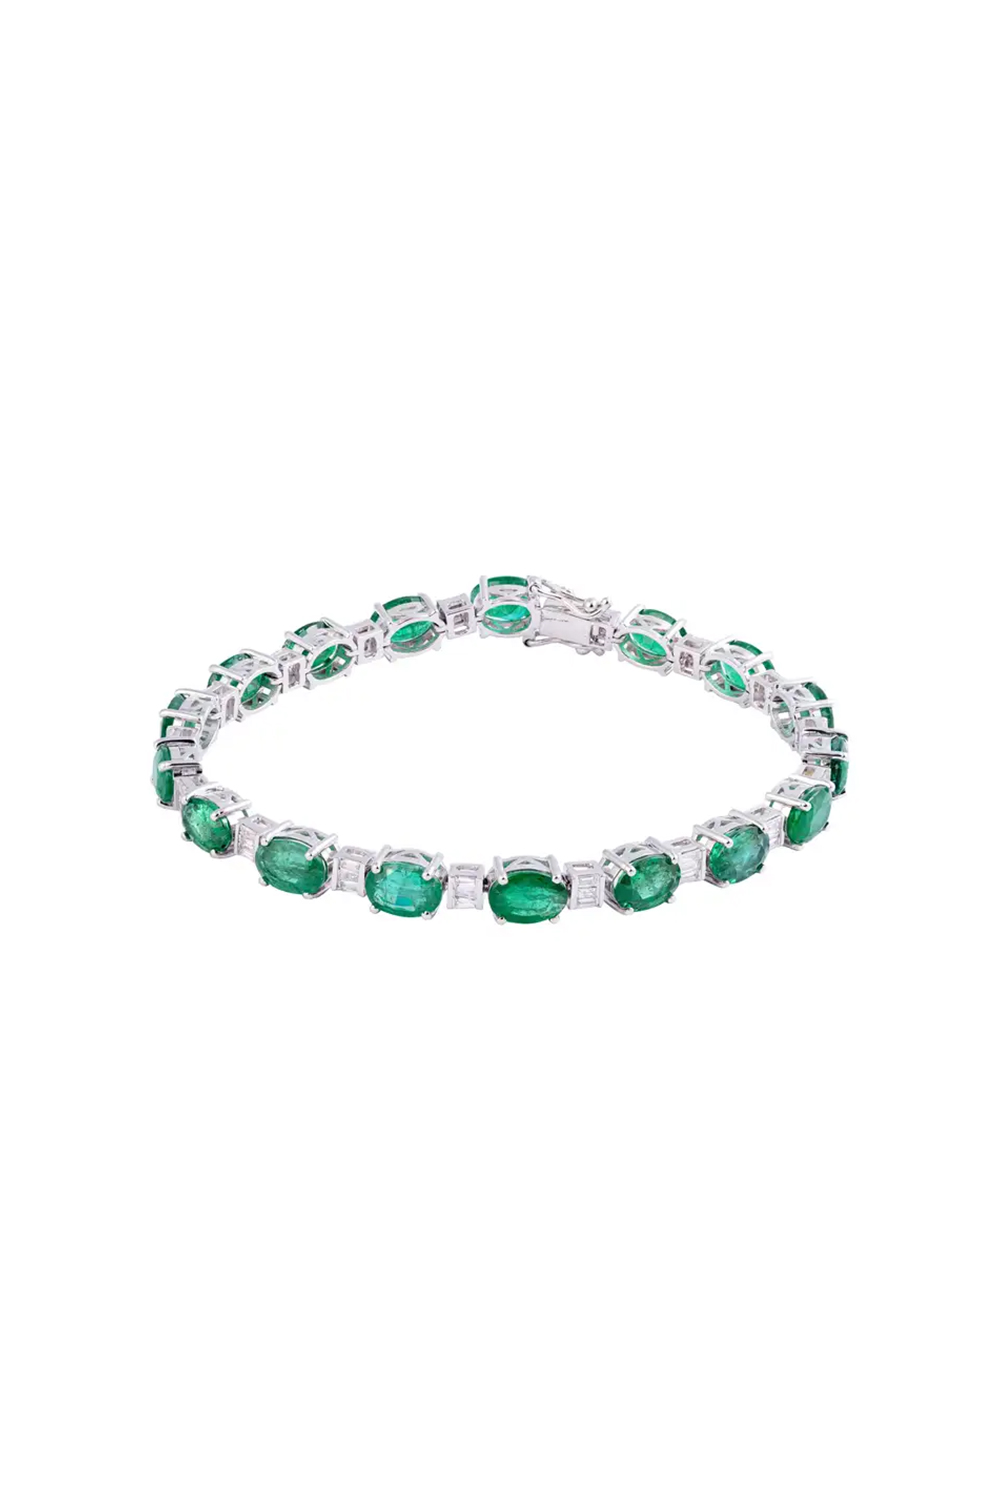 Zambian Emerald 13.06cts Tennis Bracelet with Diamonds 0.74cts and 14k Gold